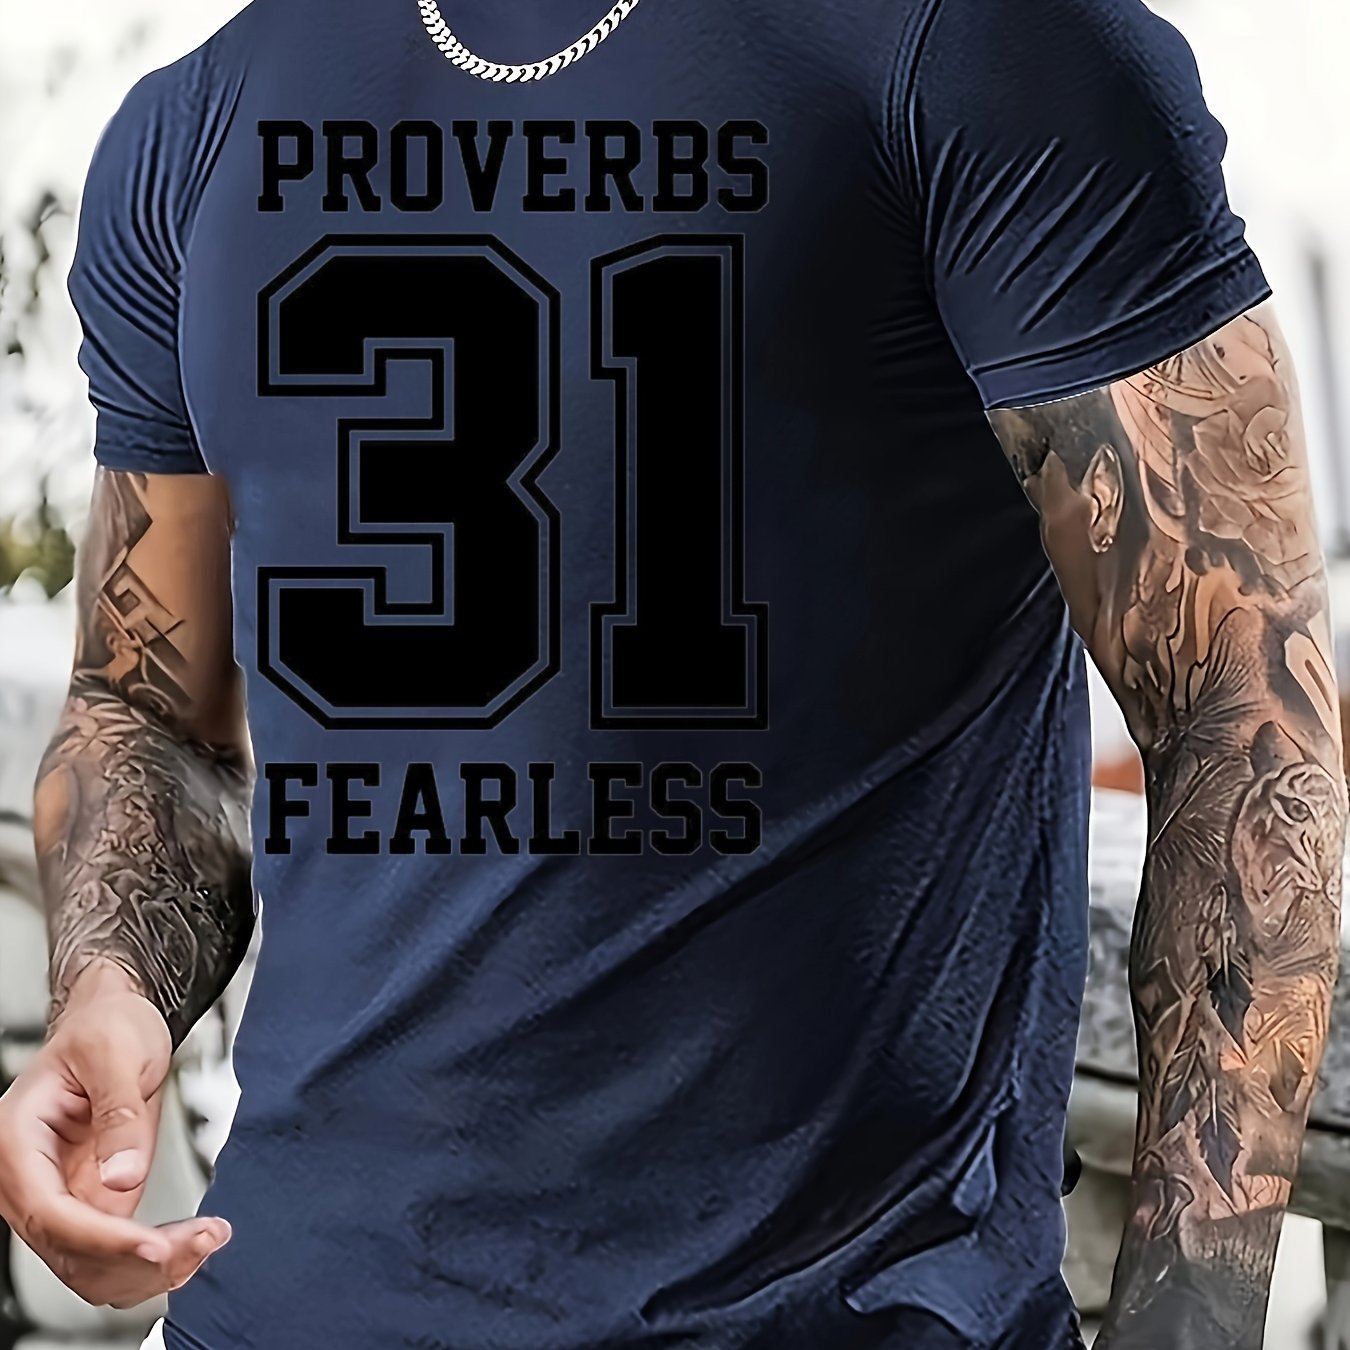 Proverbs 31 Fearless Plus Size Men's Christian T-shirt claimedbygoddesigns